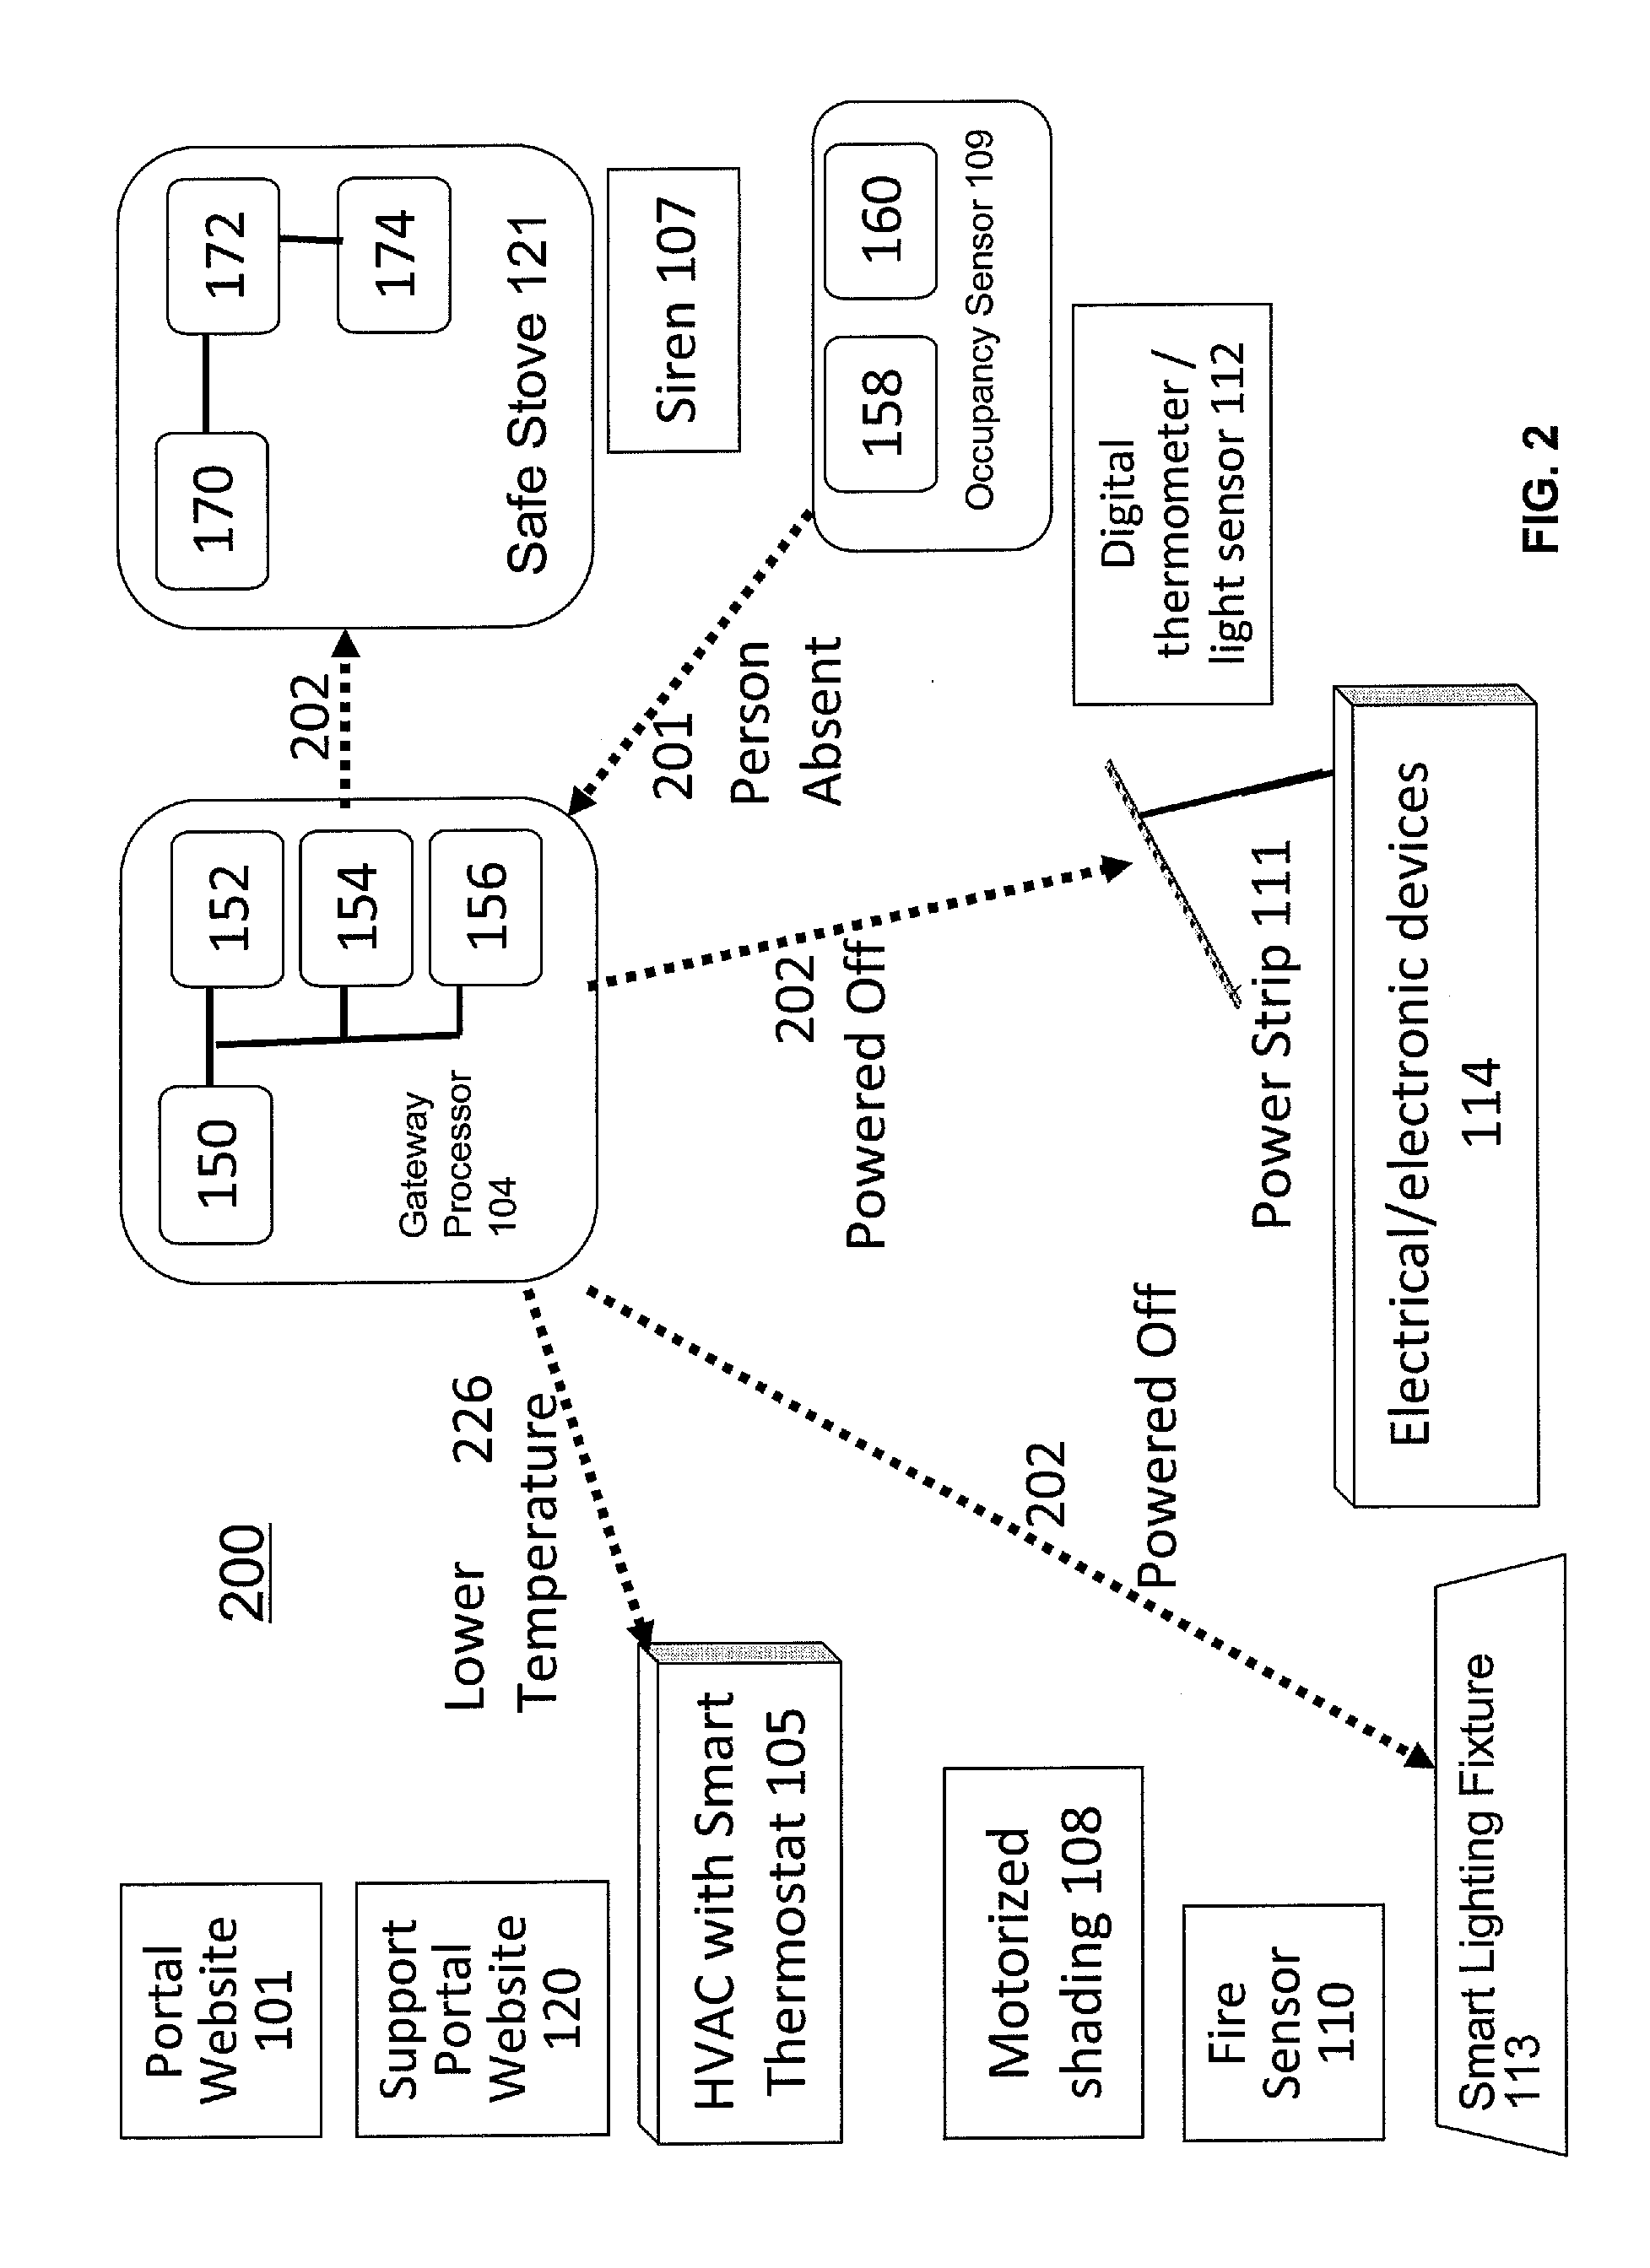 Systems, devices and methods of energy management, property security and fire hazard prevention